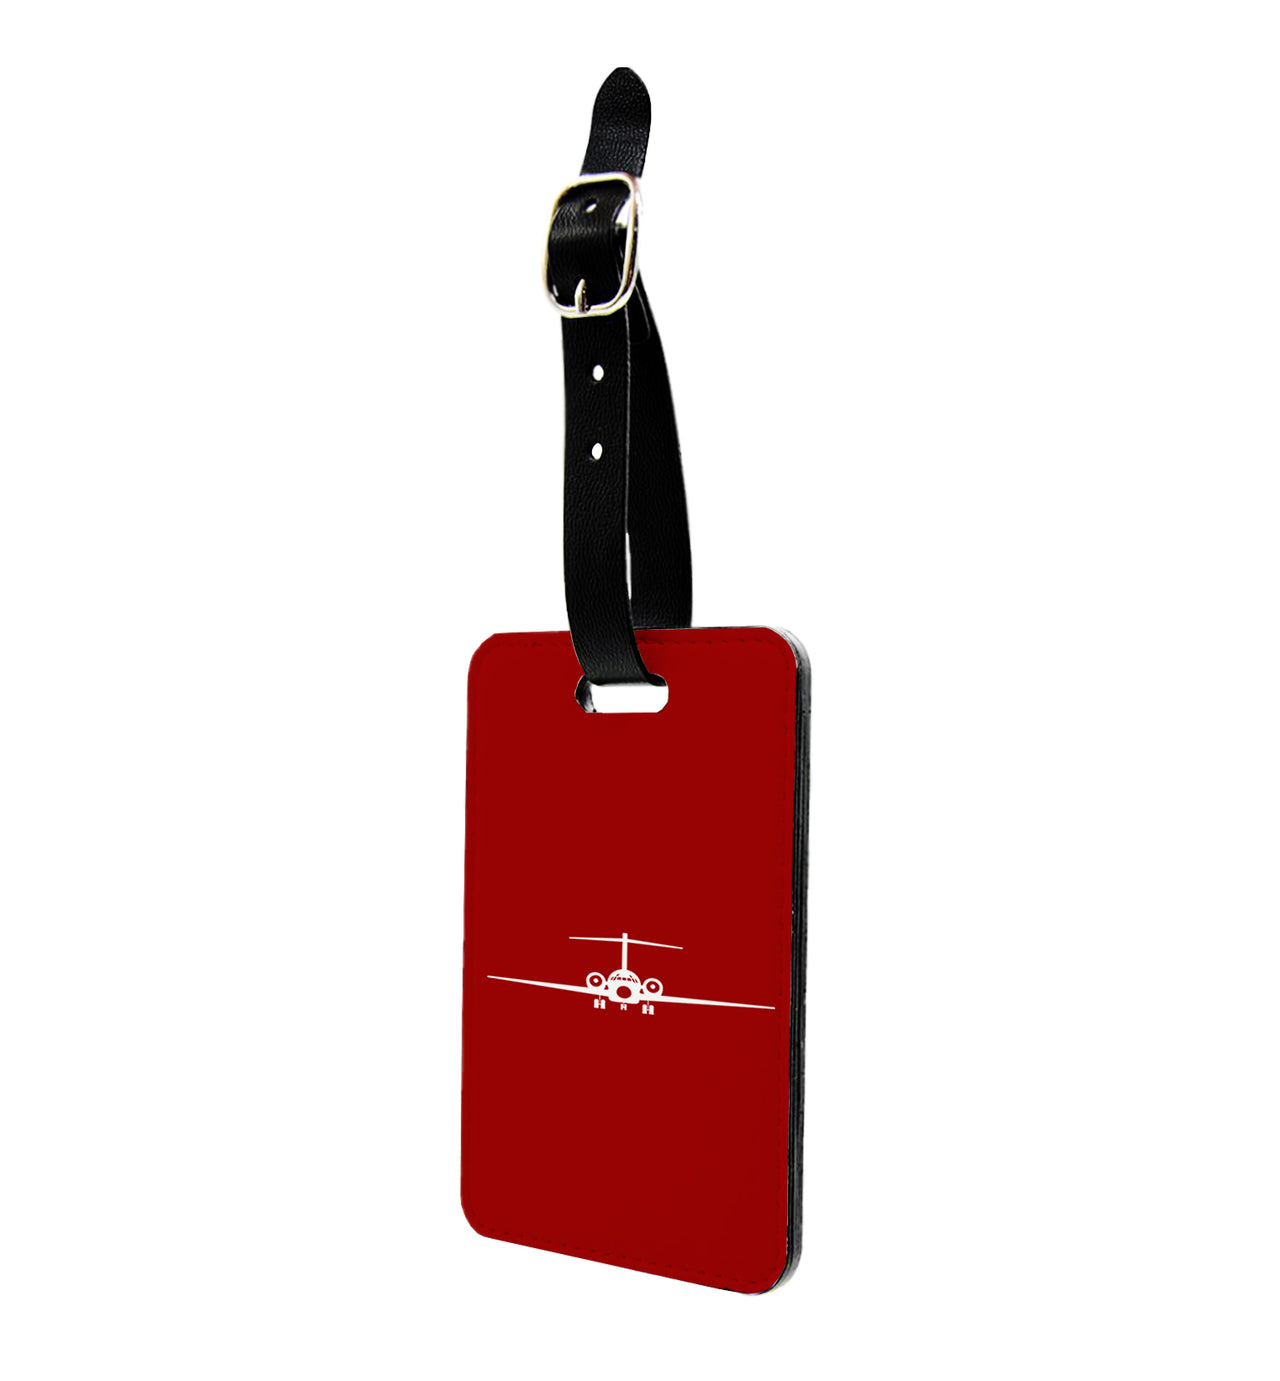 Boeing 717 Silhouette Designed Luggage Tag